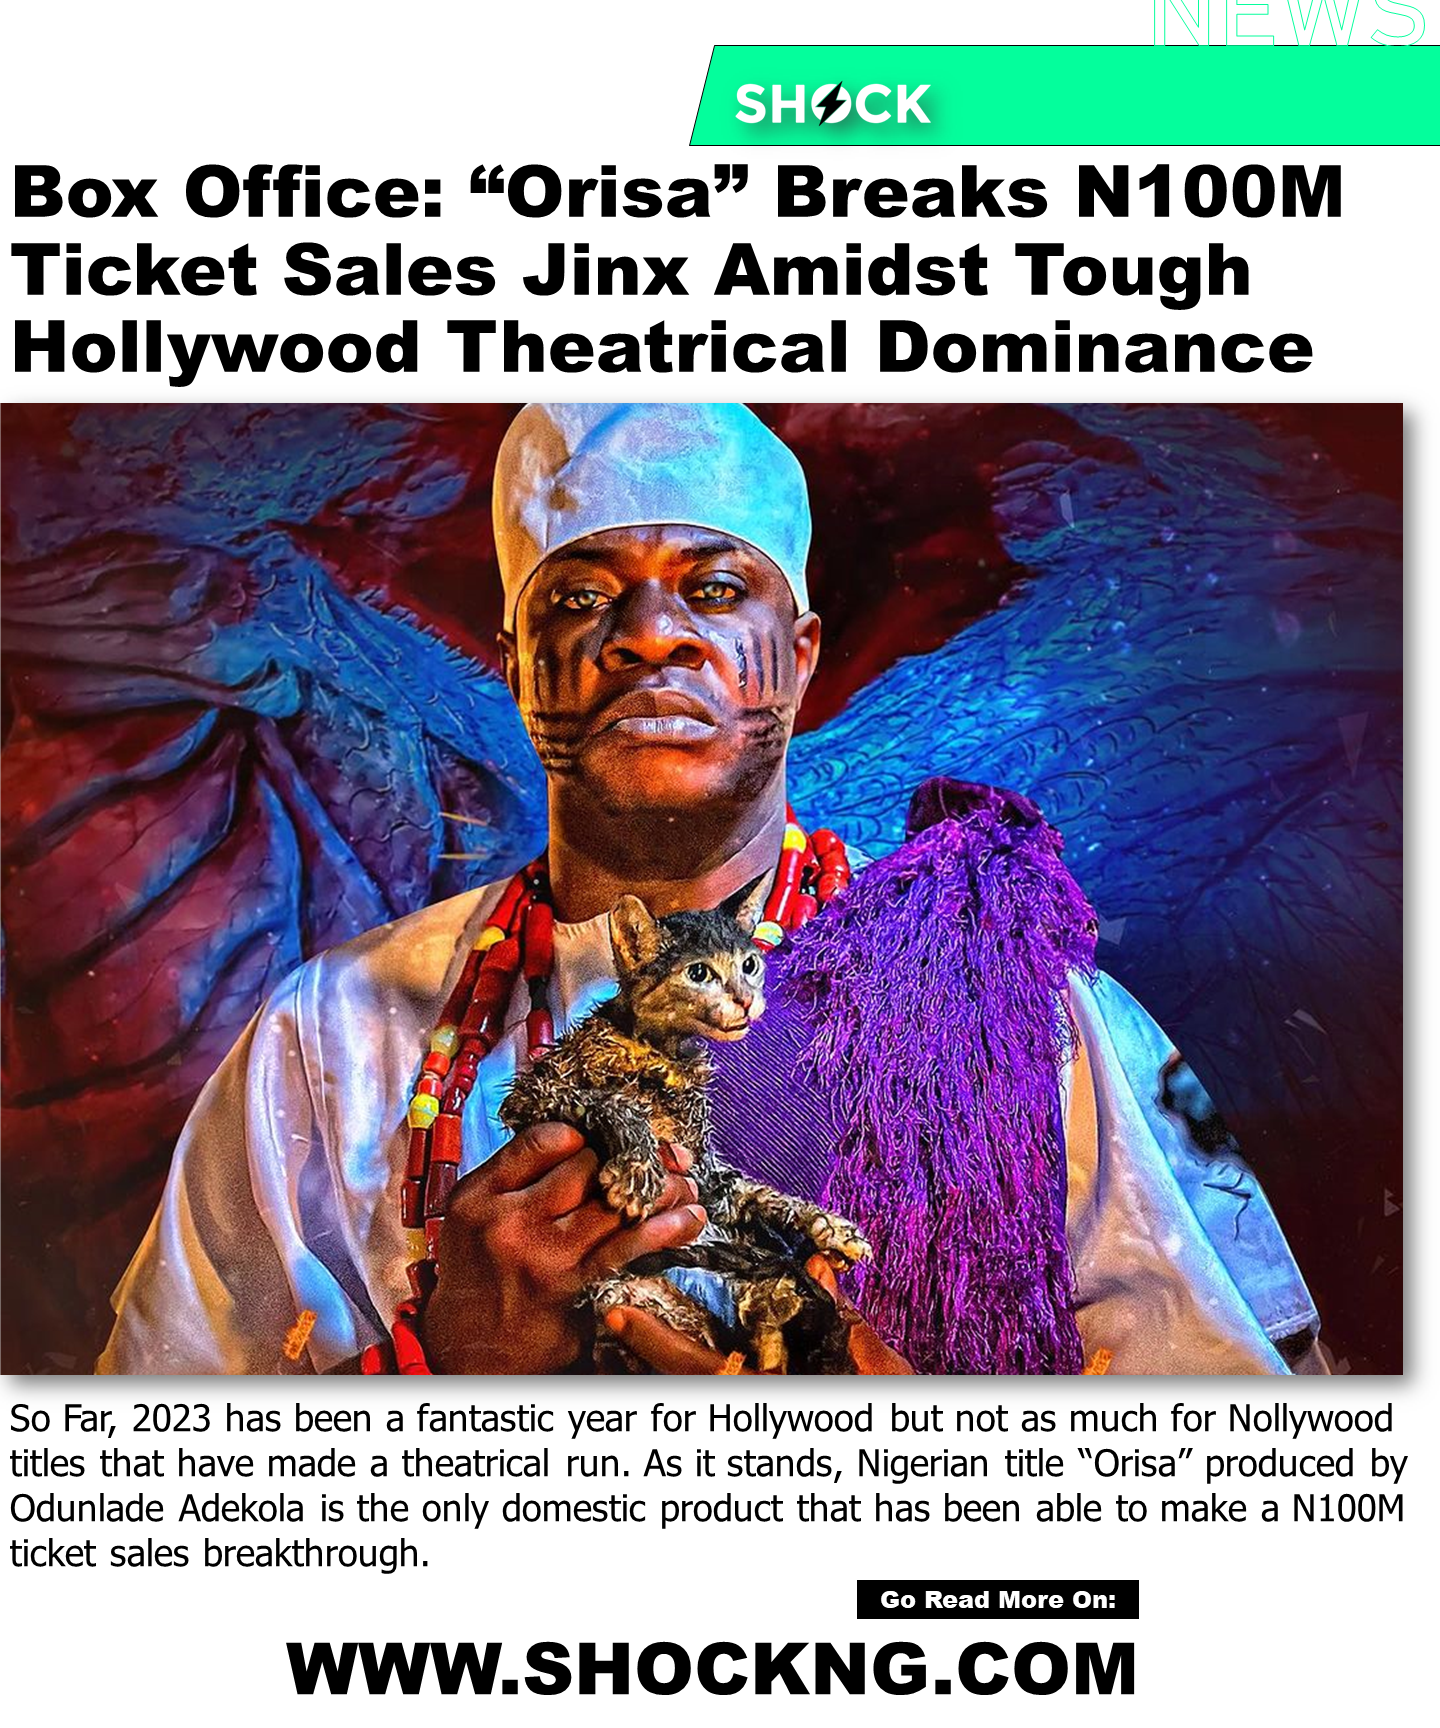 How much did orisa make - “Orisa” Breaks N100 Million Ticket Sales Jinx Amidst Tough Hollywood Theatrical Dominance